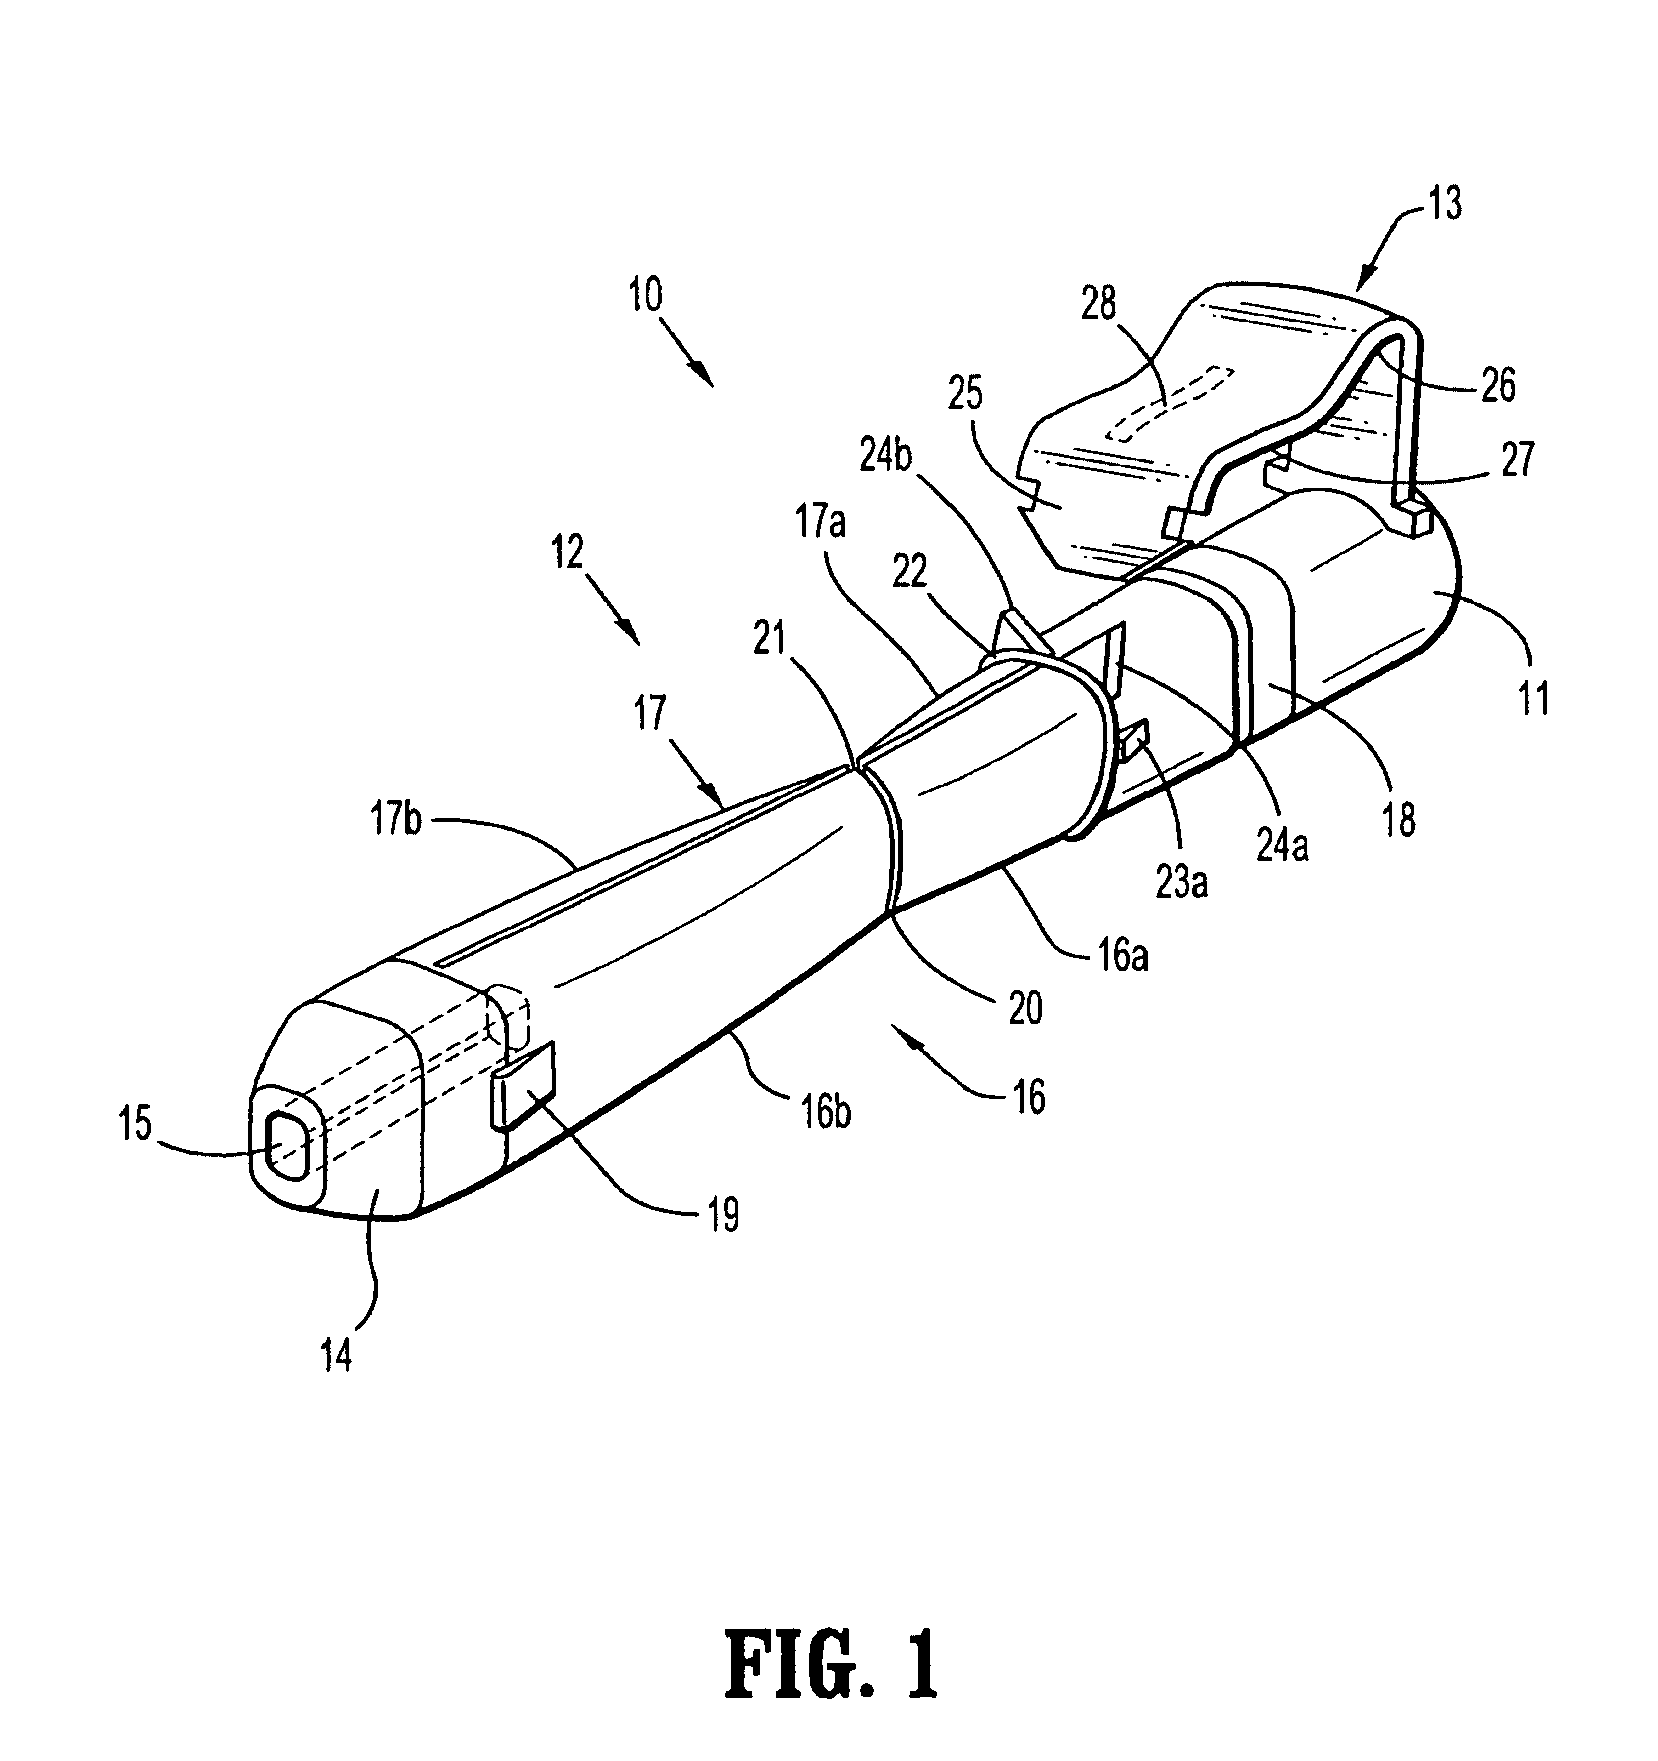 Safety device with trigger mechanism